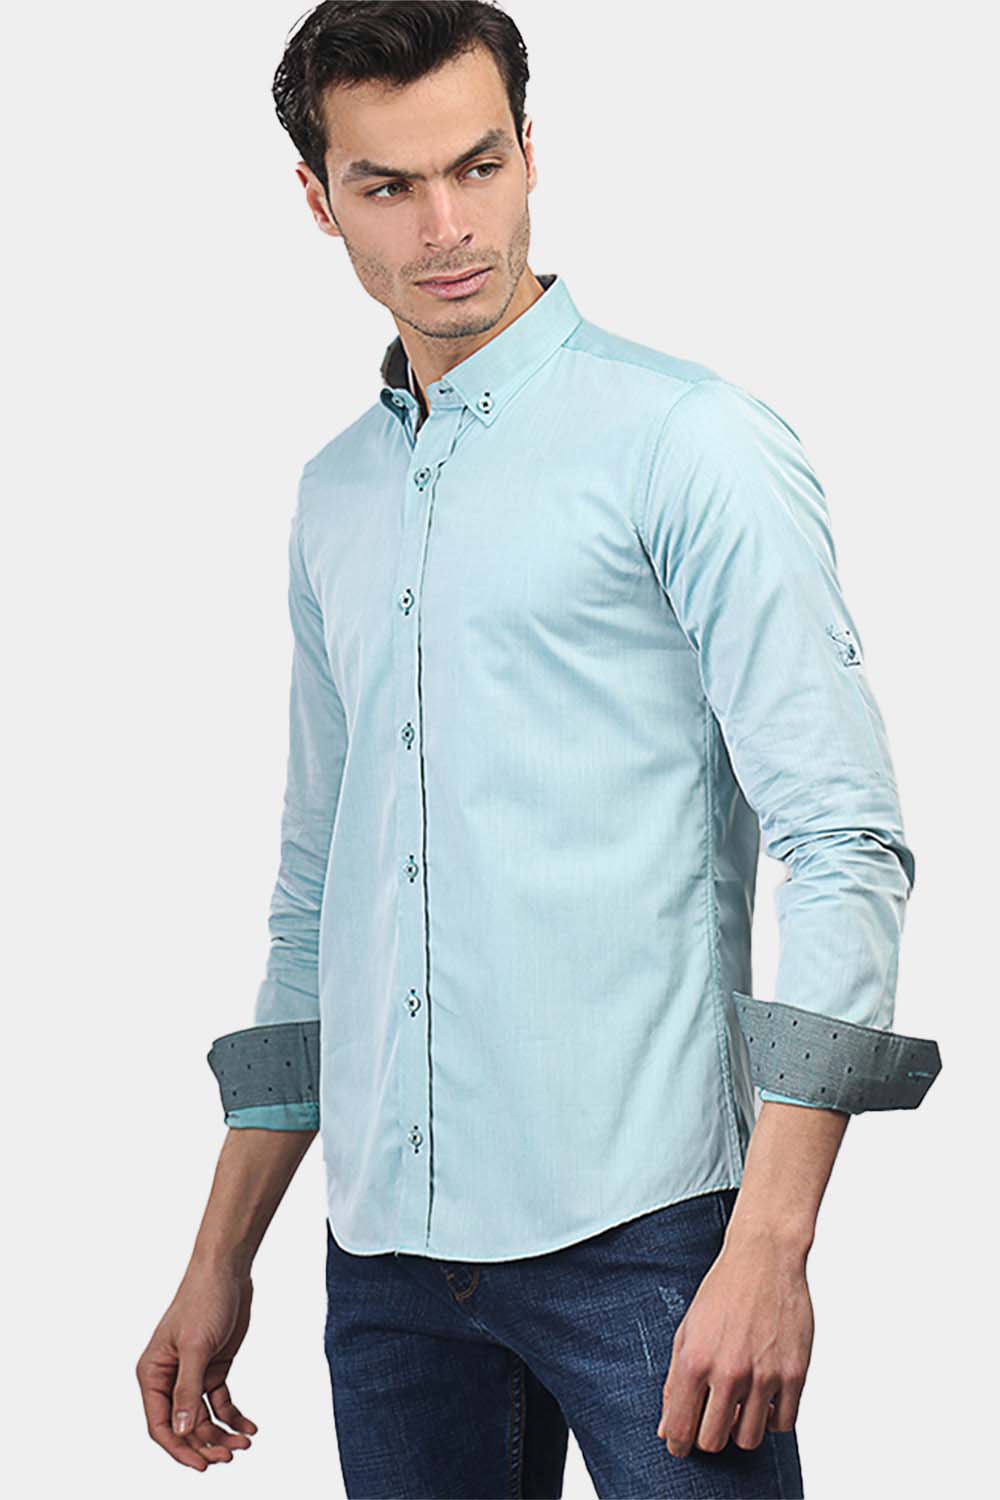 Slim Fit Shirt Turquoise - TIE HOUSE